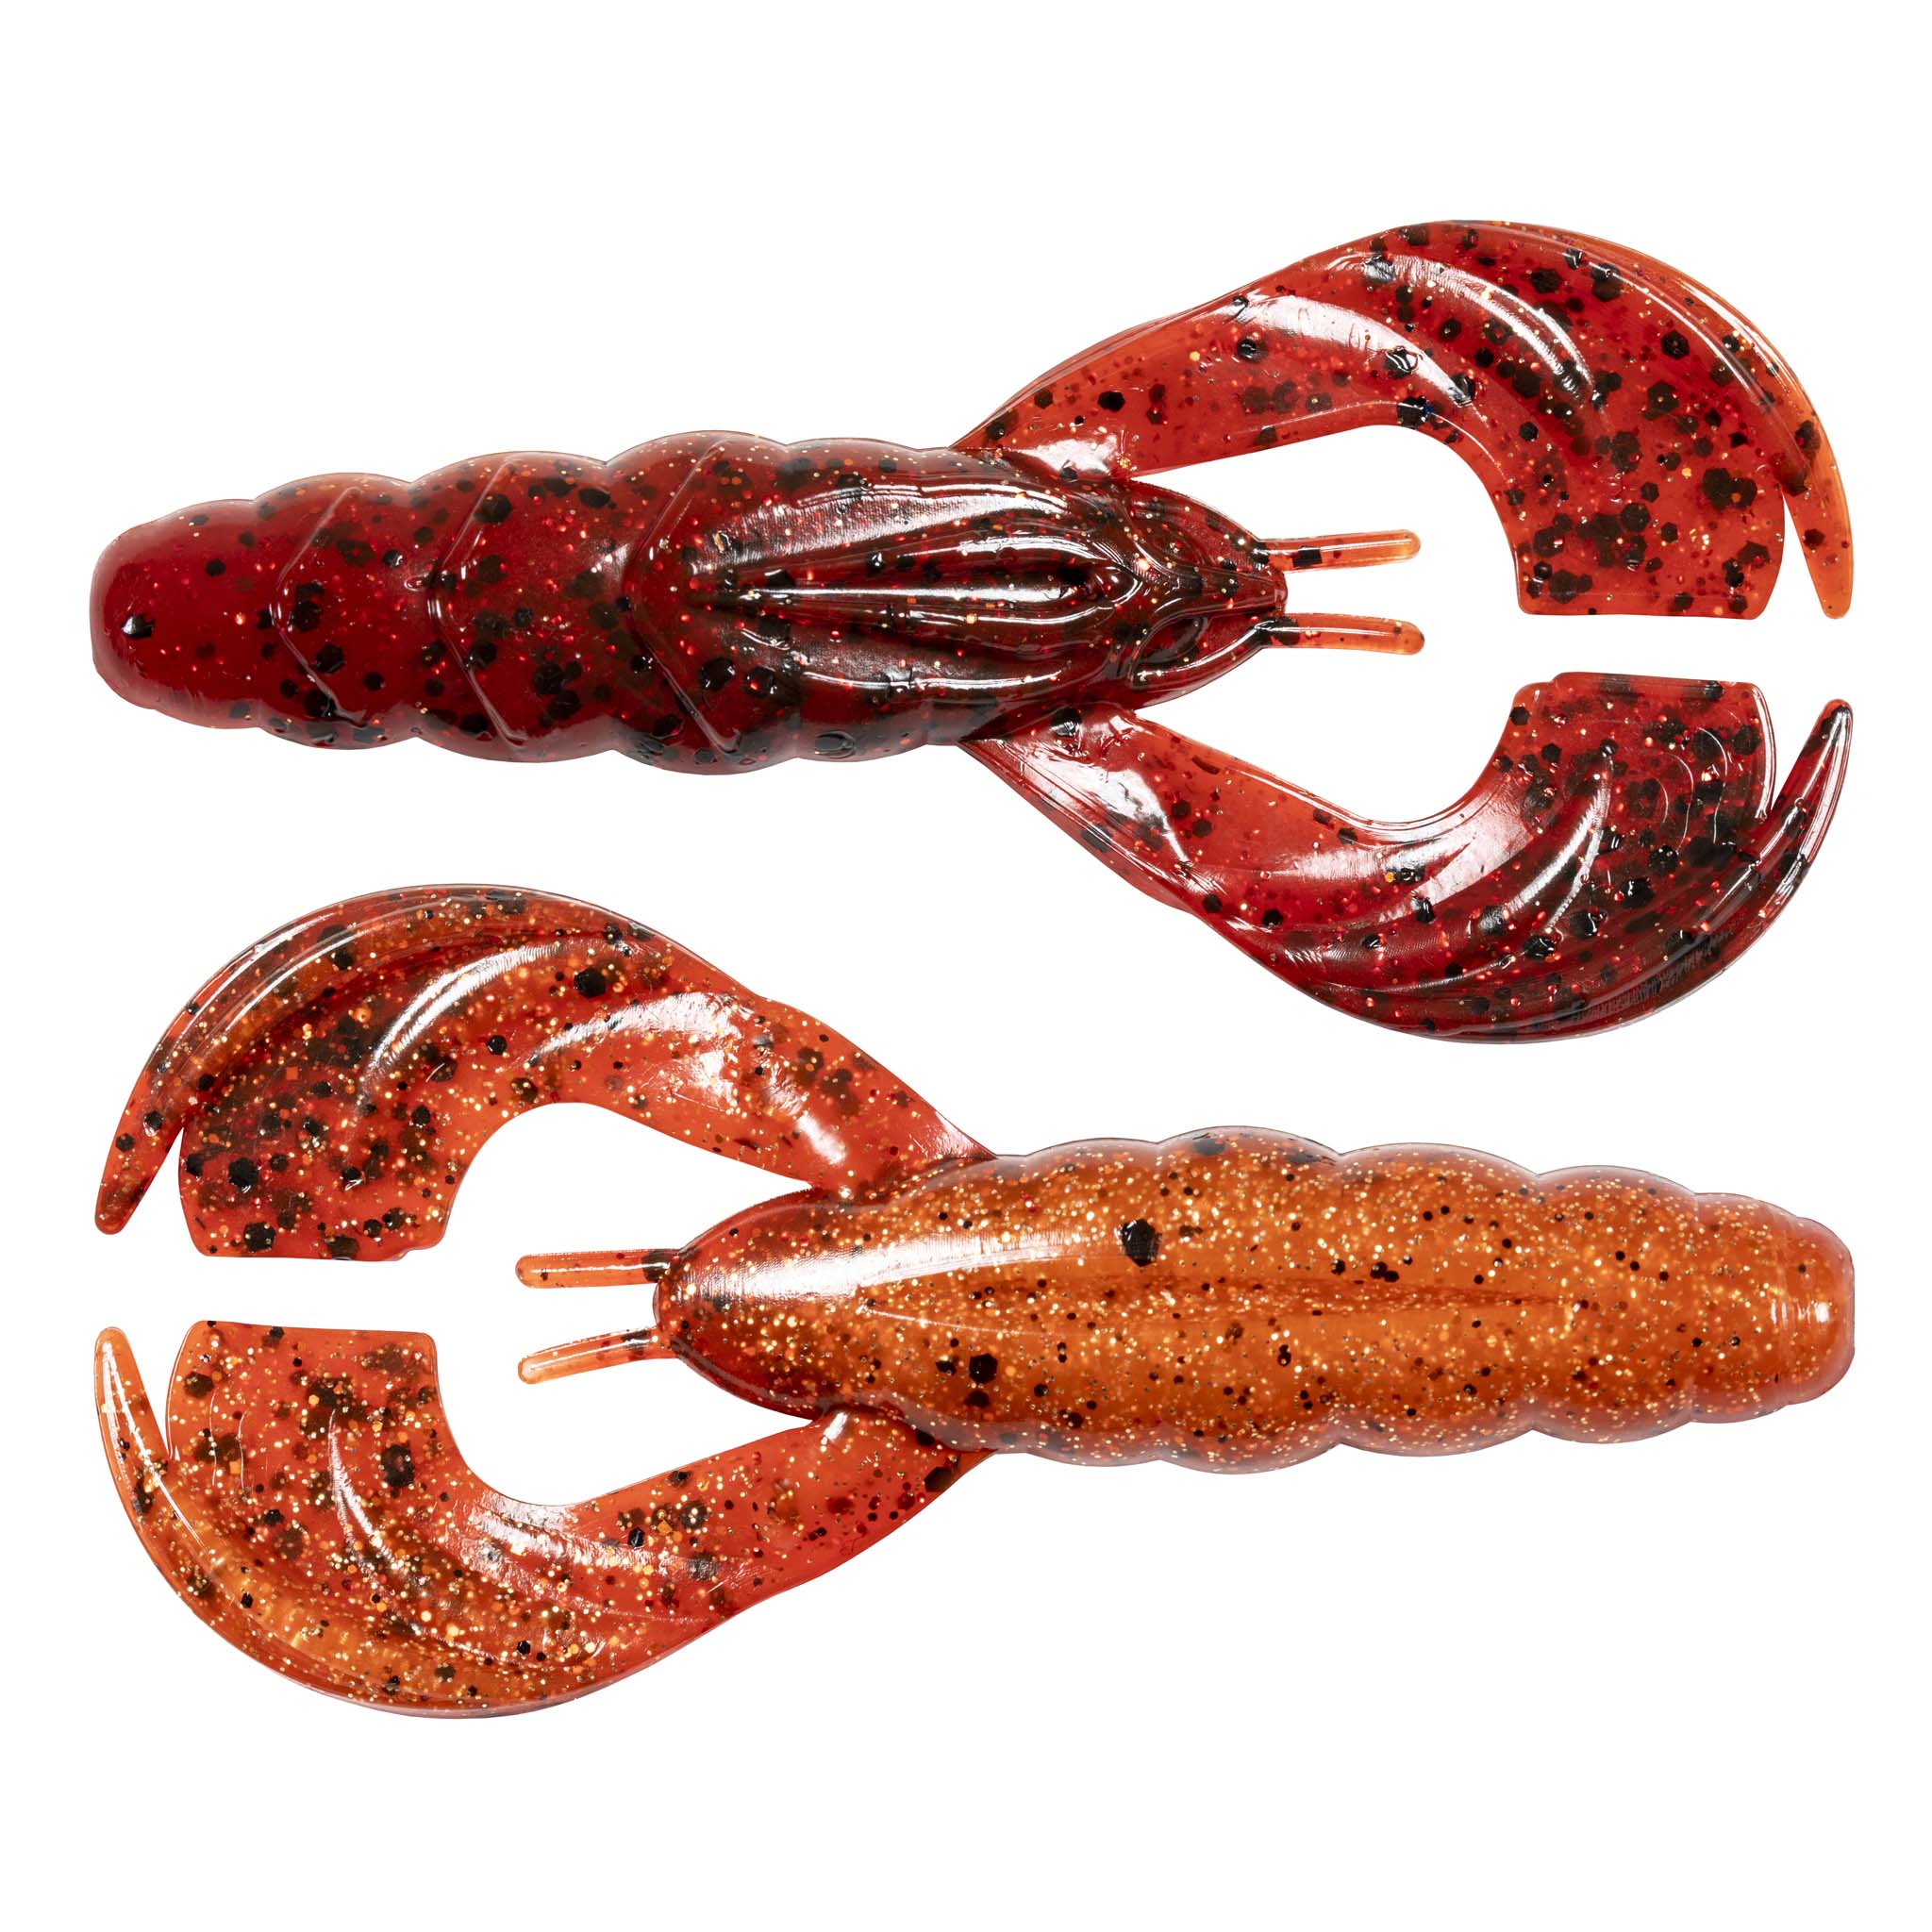 Z-Man Billy Goat Fire Craw Jagged Tooth Tackle